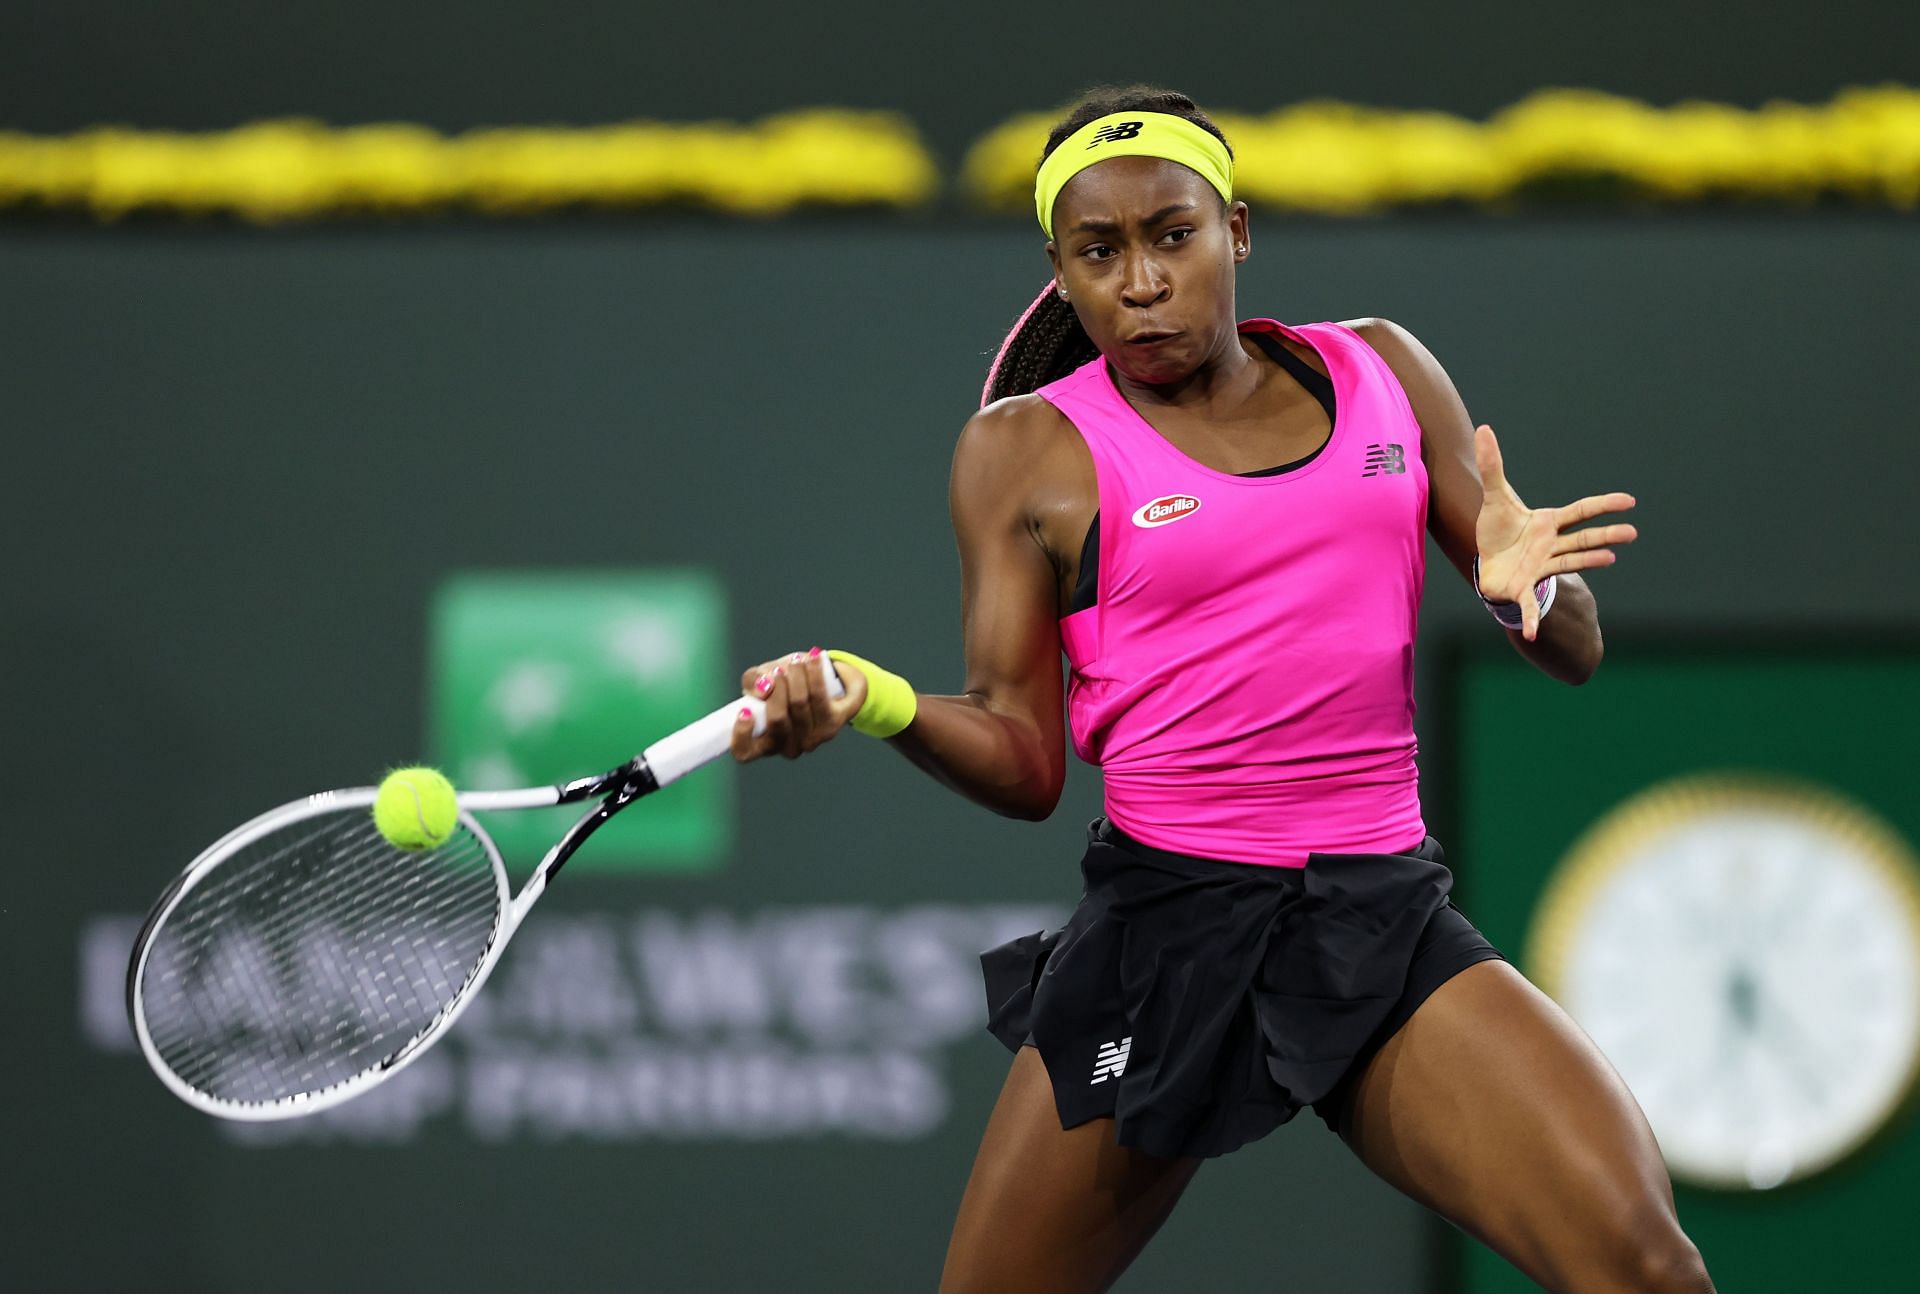 5 female tennis players who can win a Grand Slam in 2022